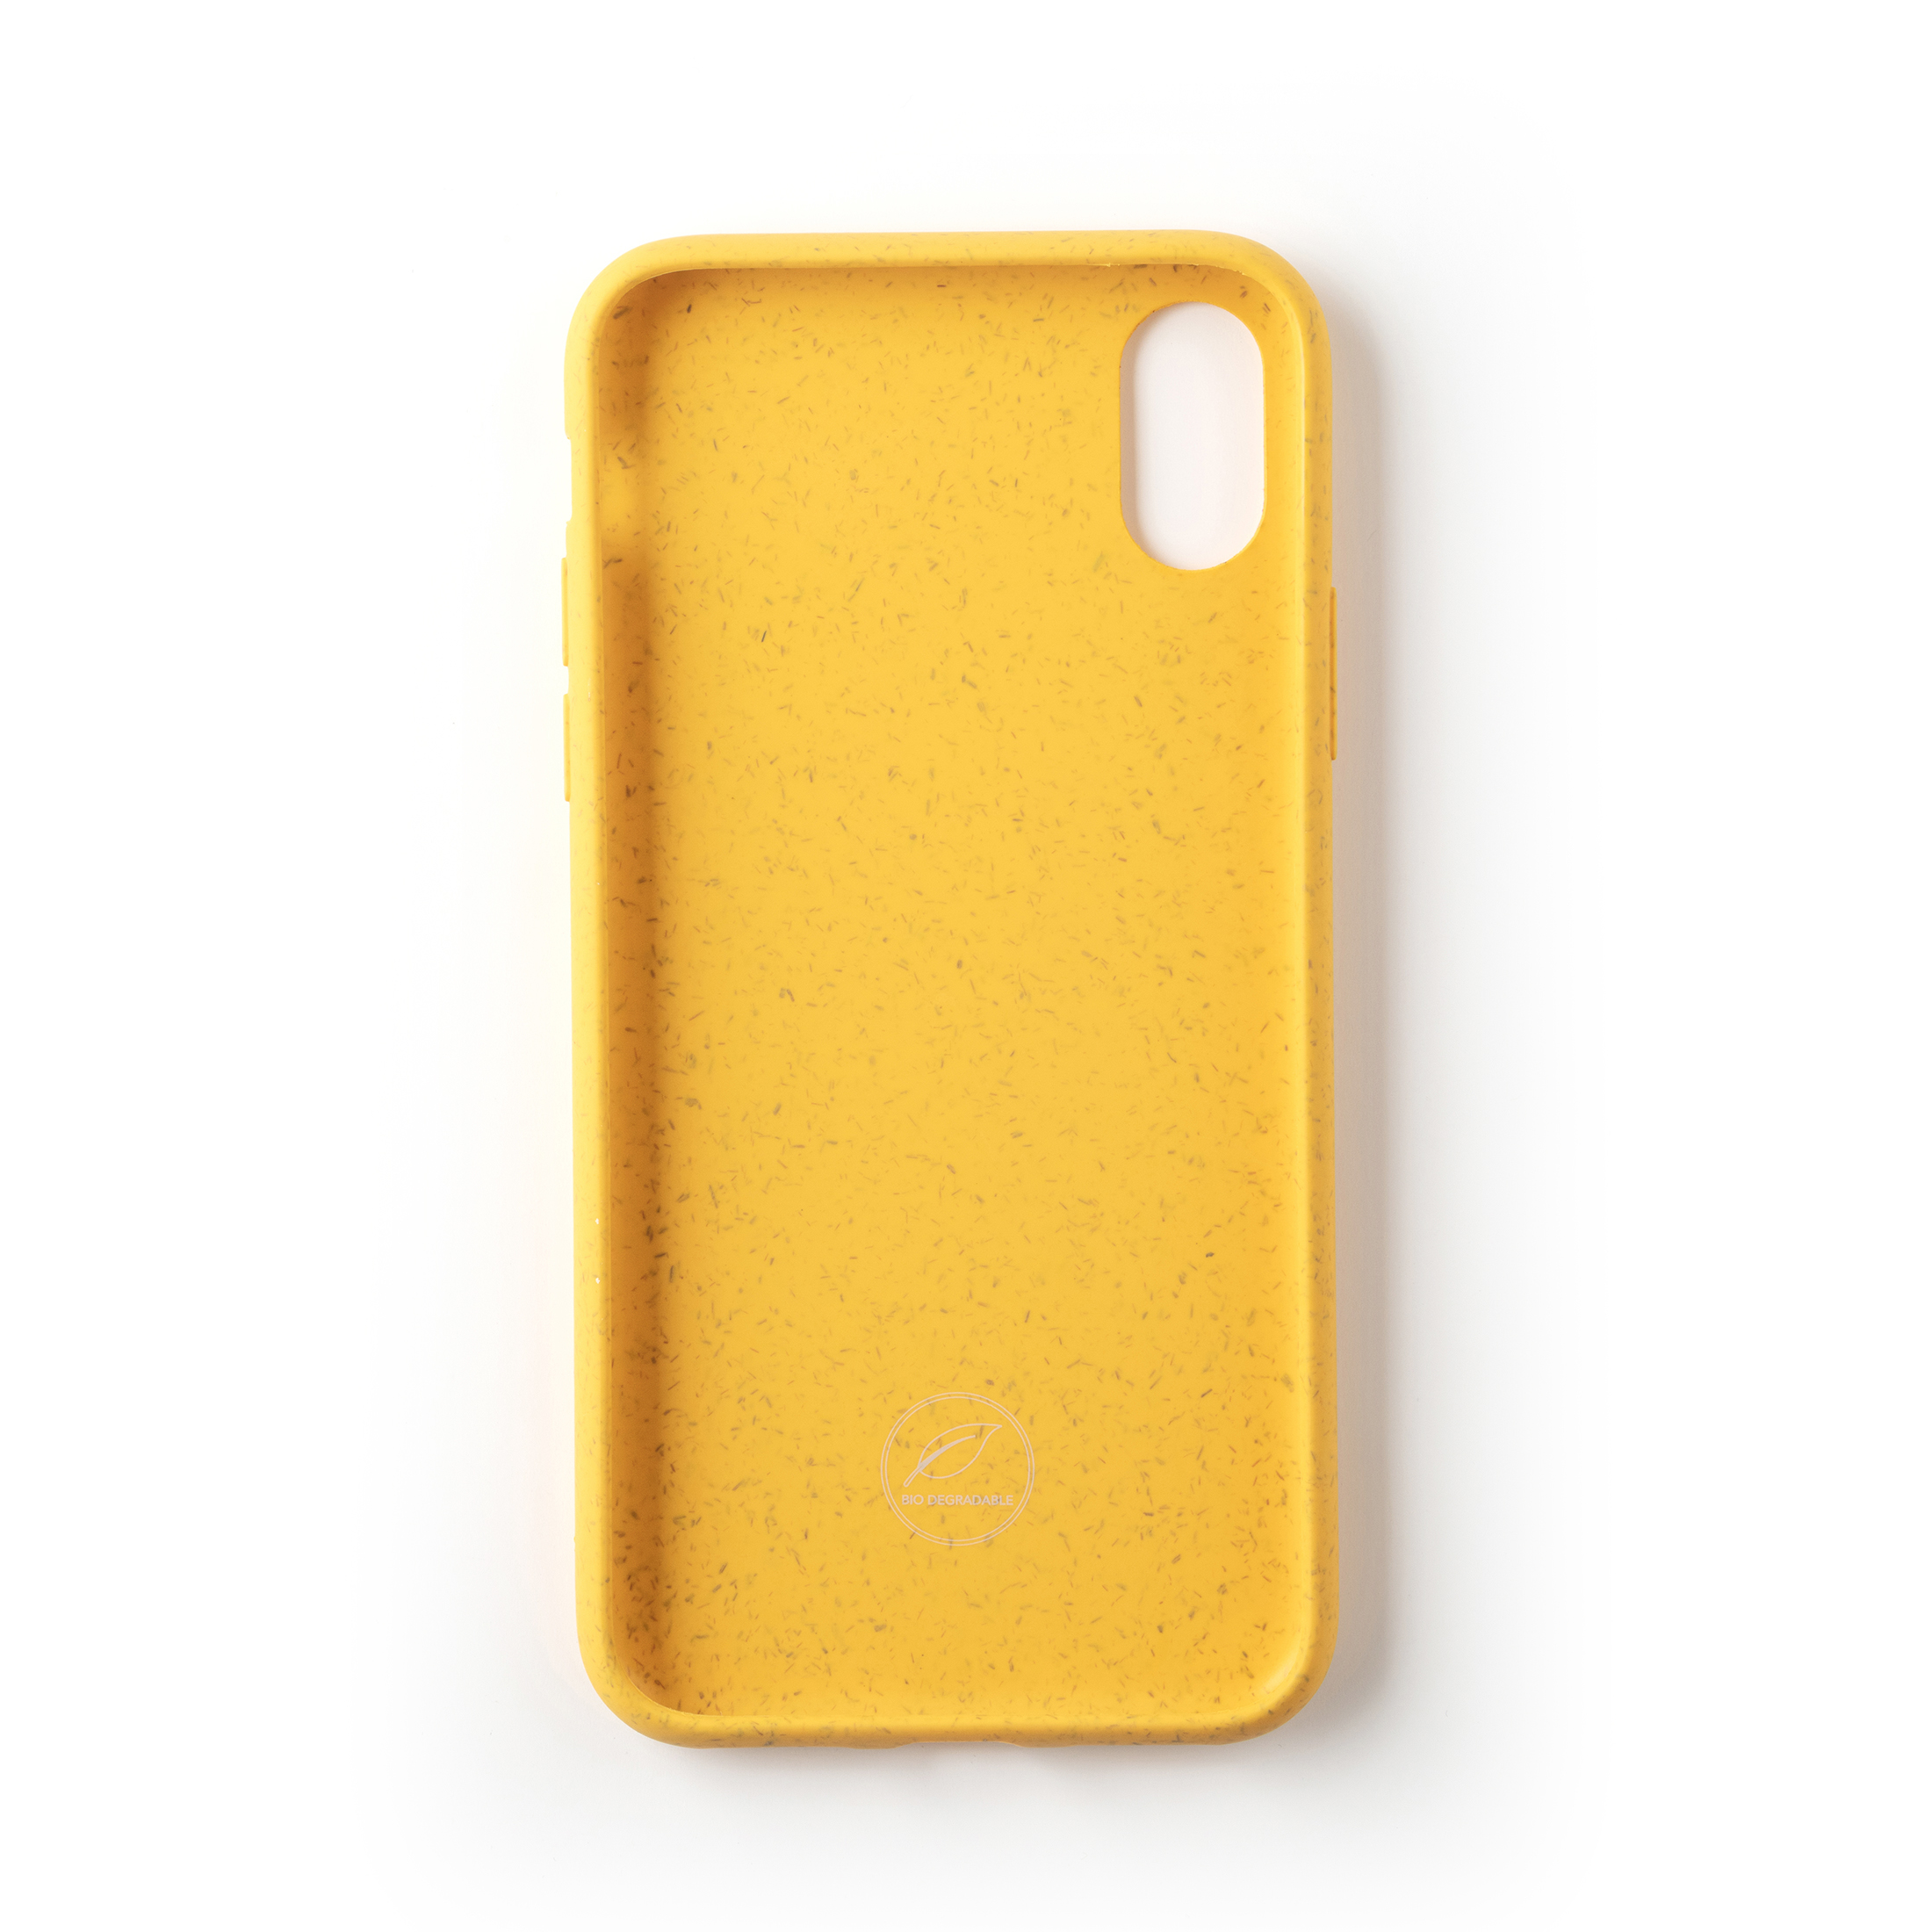 WILMA Backcover, iPhone RIPXS, ECO yellow X/XS, Apple, BY FASHION